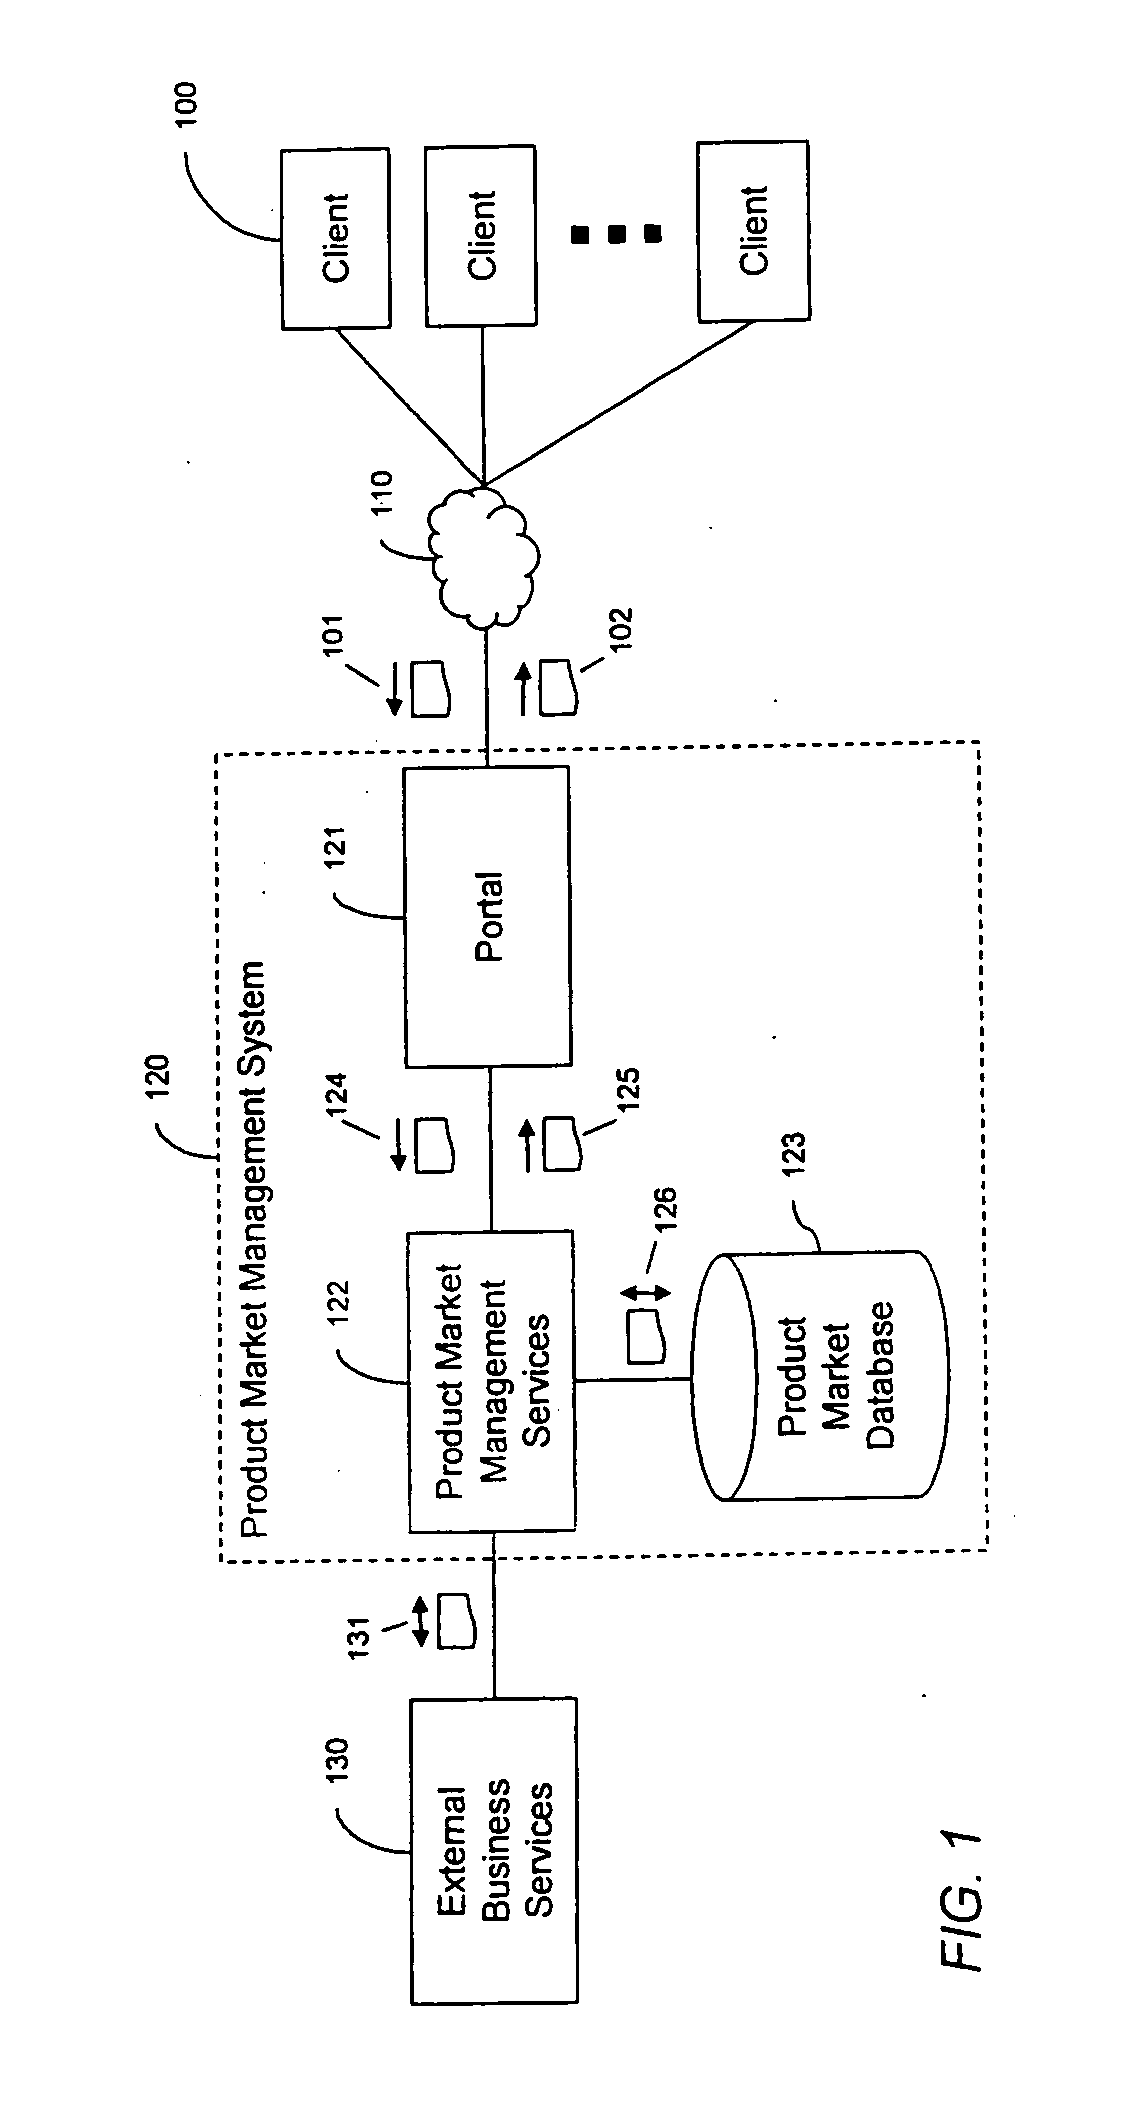 Systems and methods to facilitate product market management